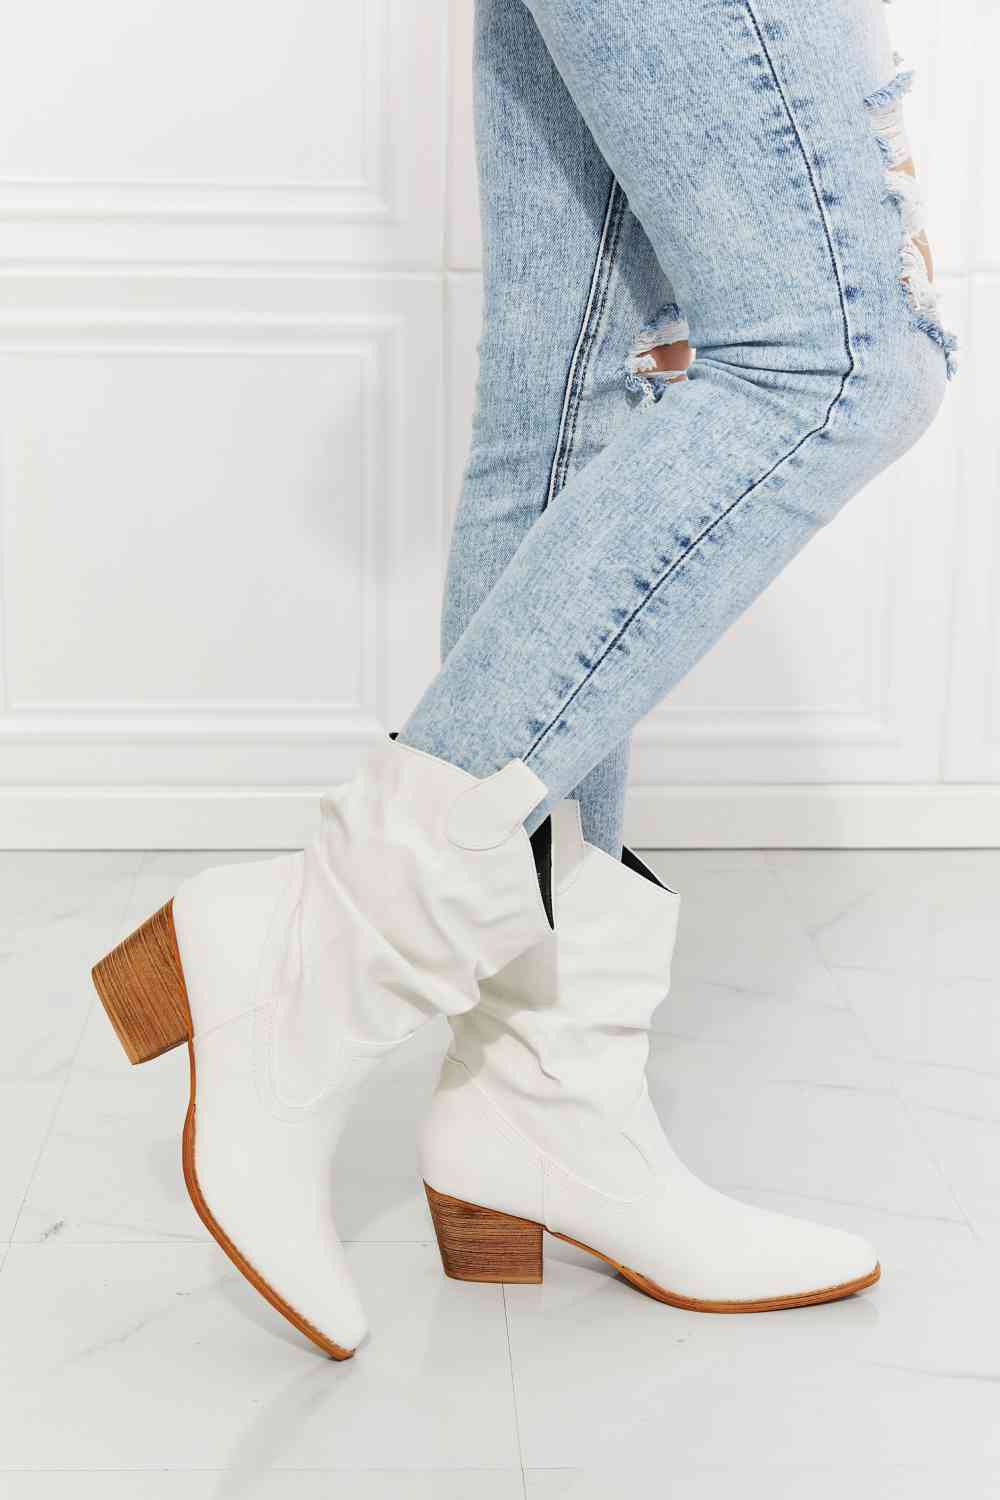 MMShoes White Scrunch Cowboy Boots: Better in Texas